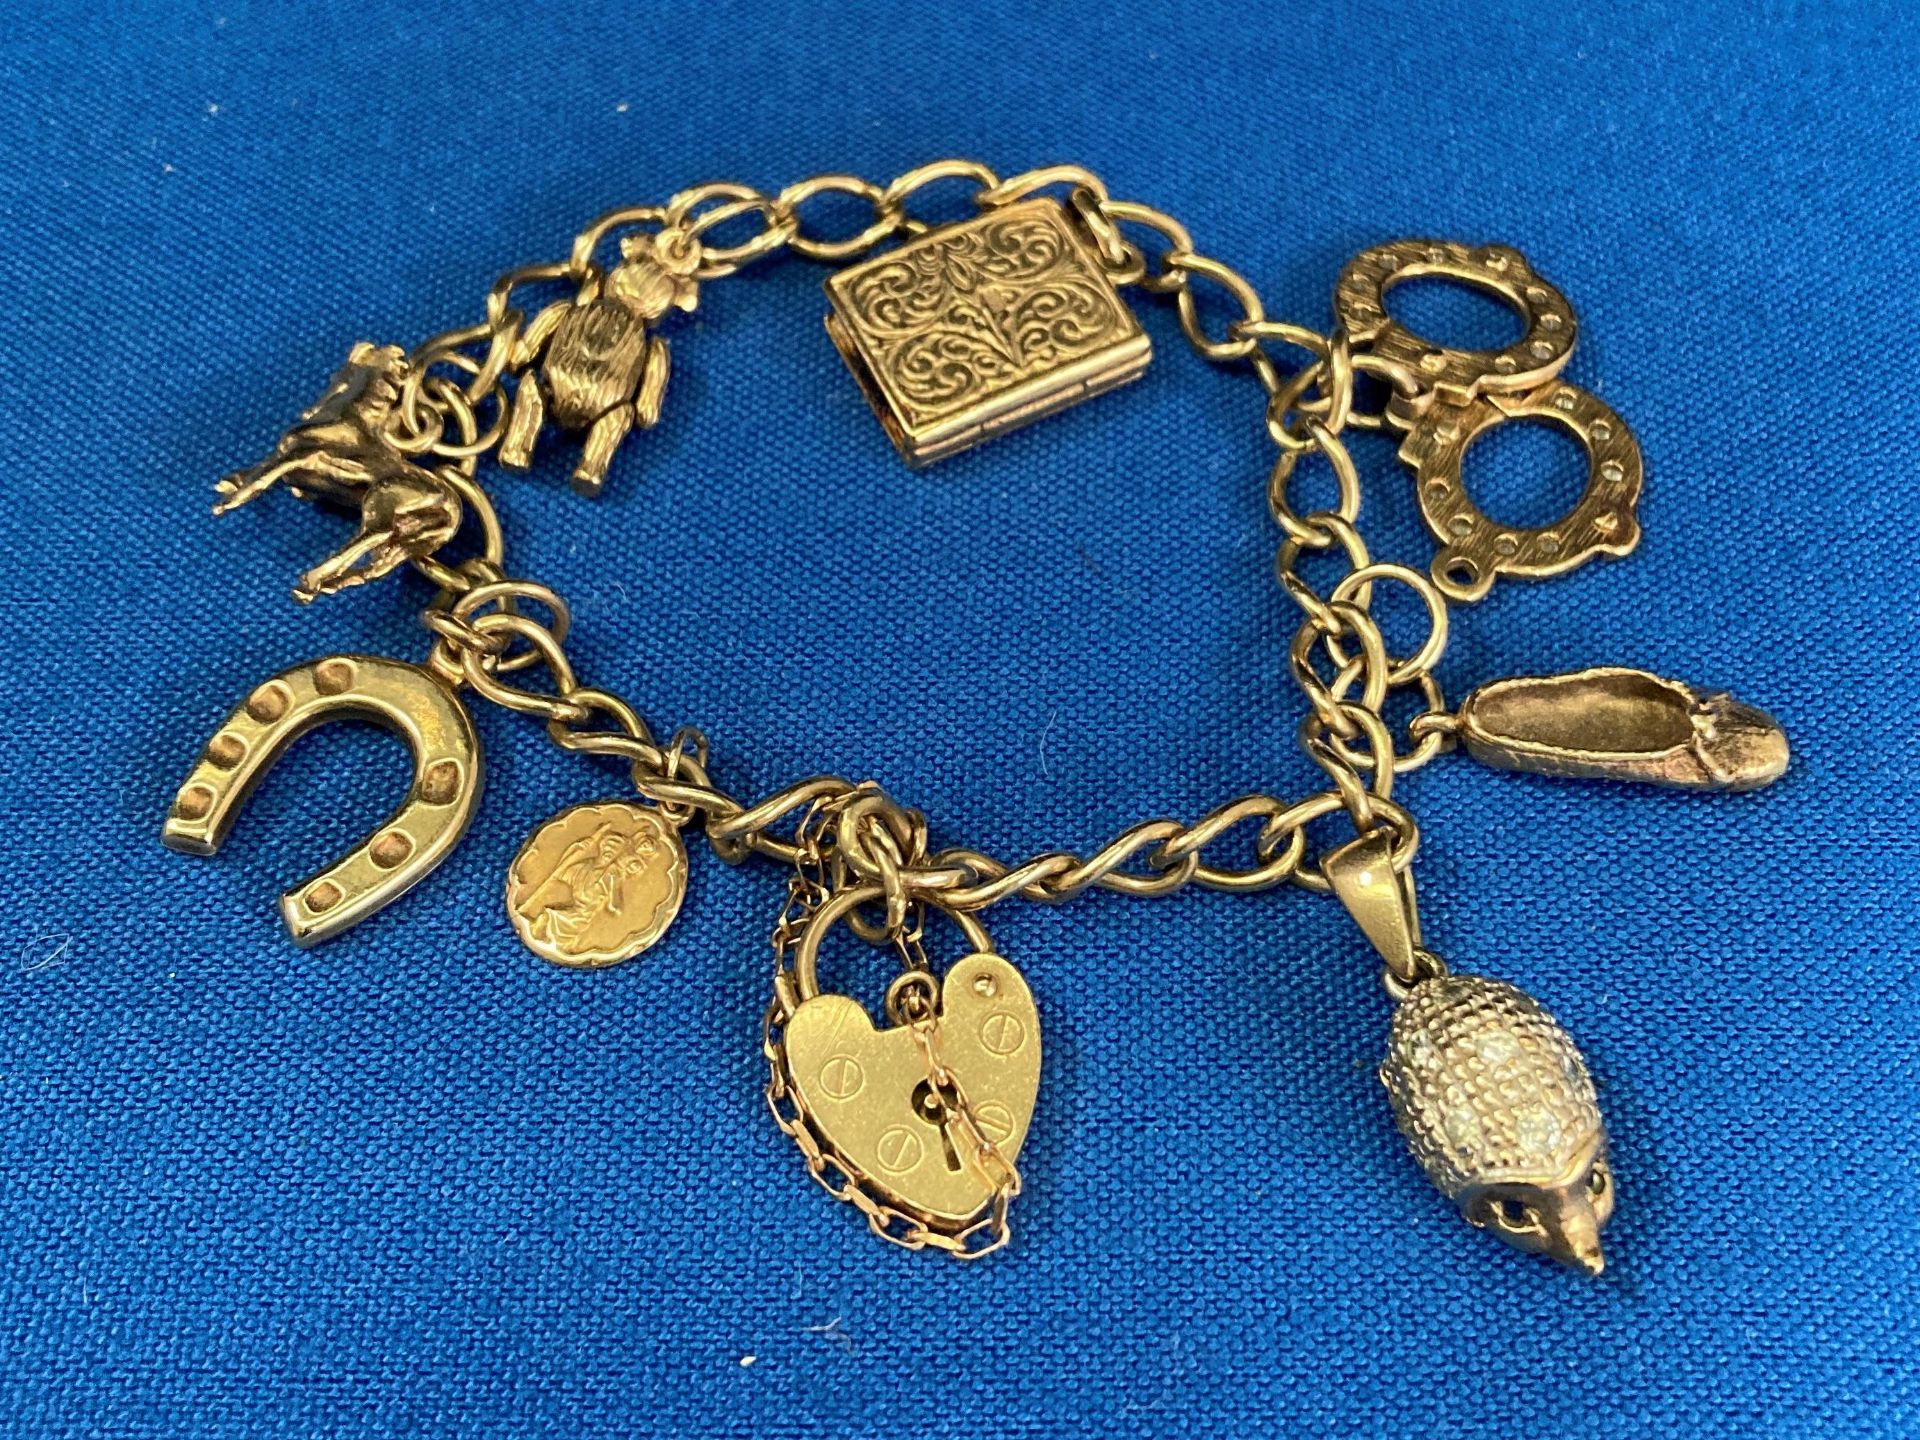 9ct gold charm gate bracelet with heart-shaped clasp and charms, 7" long.